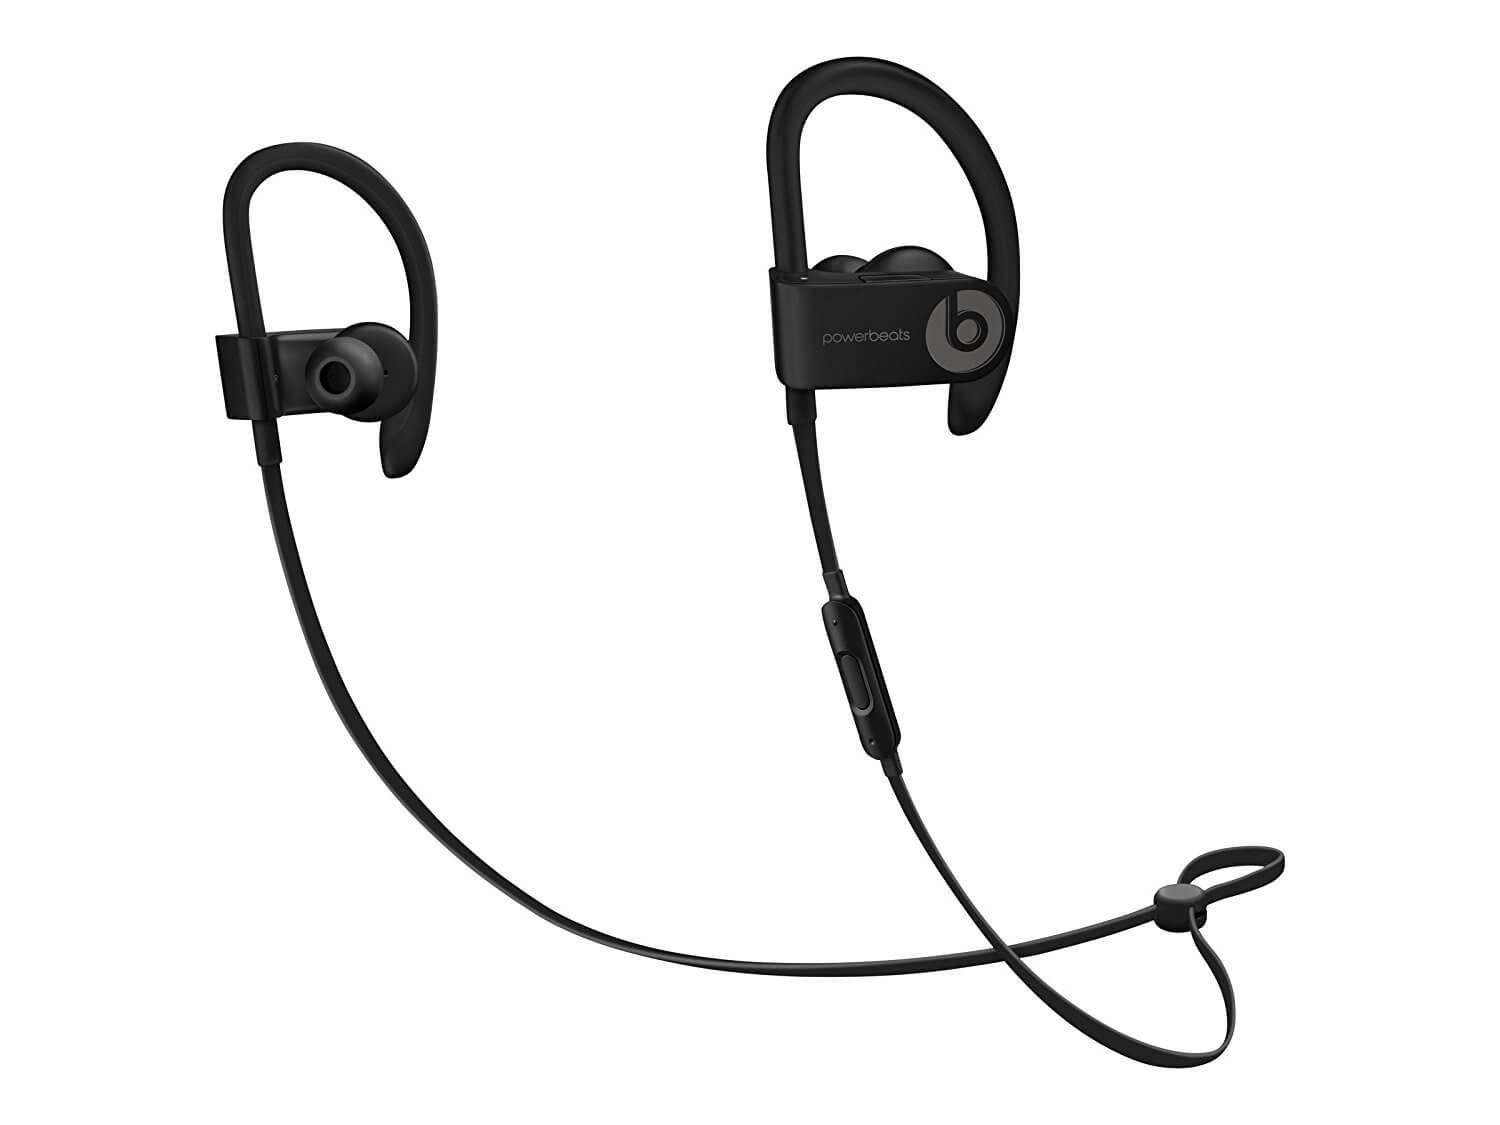 Profeti ekstremt Blandet Powerbeats 3 Reviewed and Tested in 2023 | RunnerClick